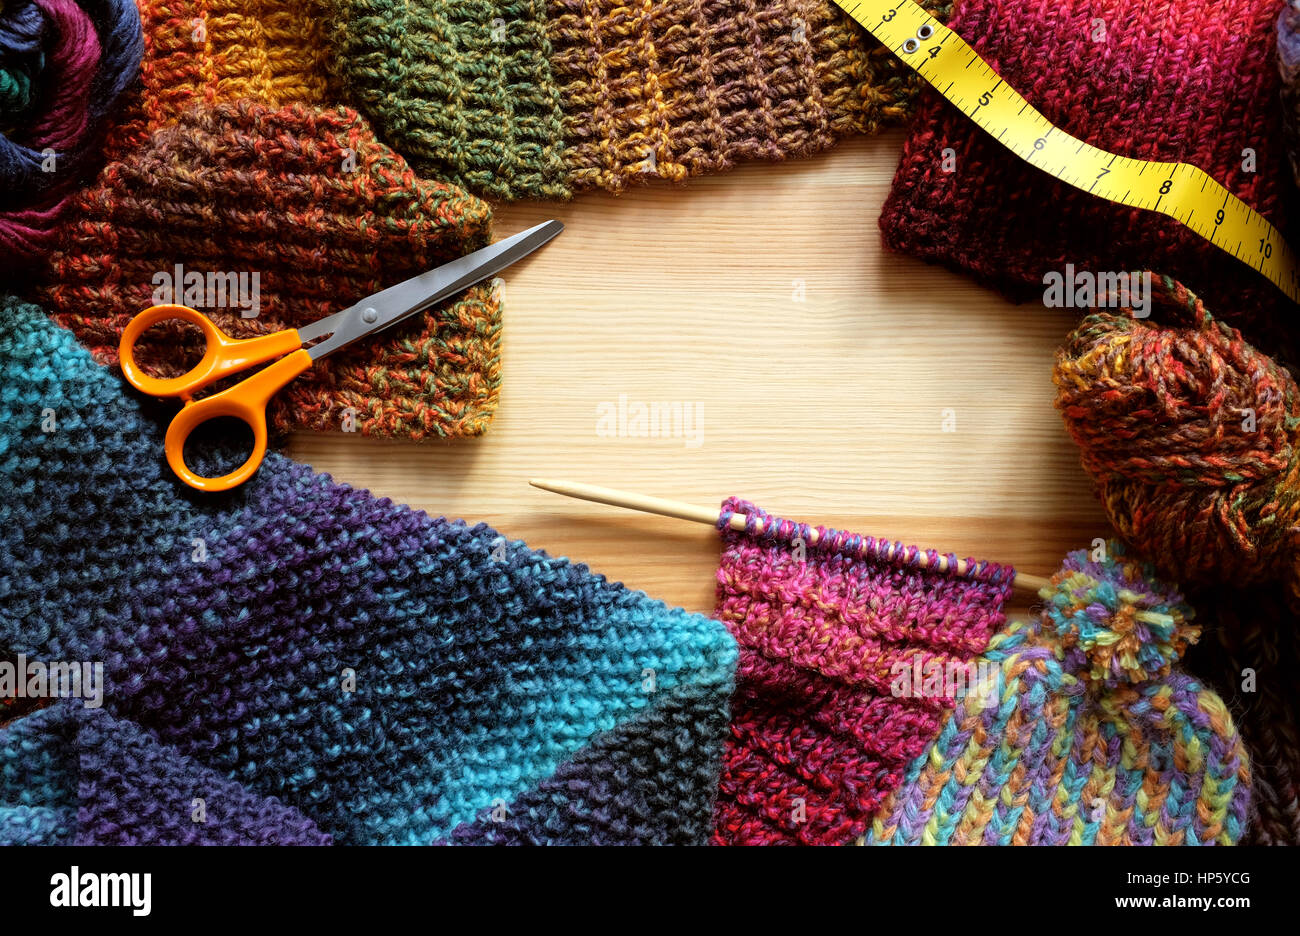 Border of knitting on needle, knitwear, wool, craft scissors and tape measure with copy space on wooden background Stock Photo